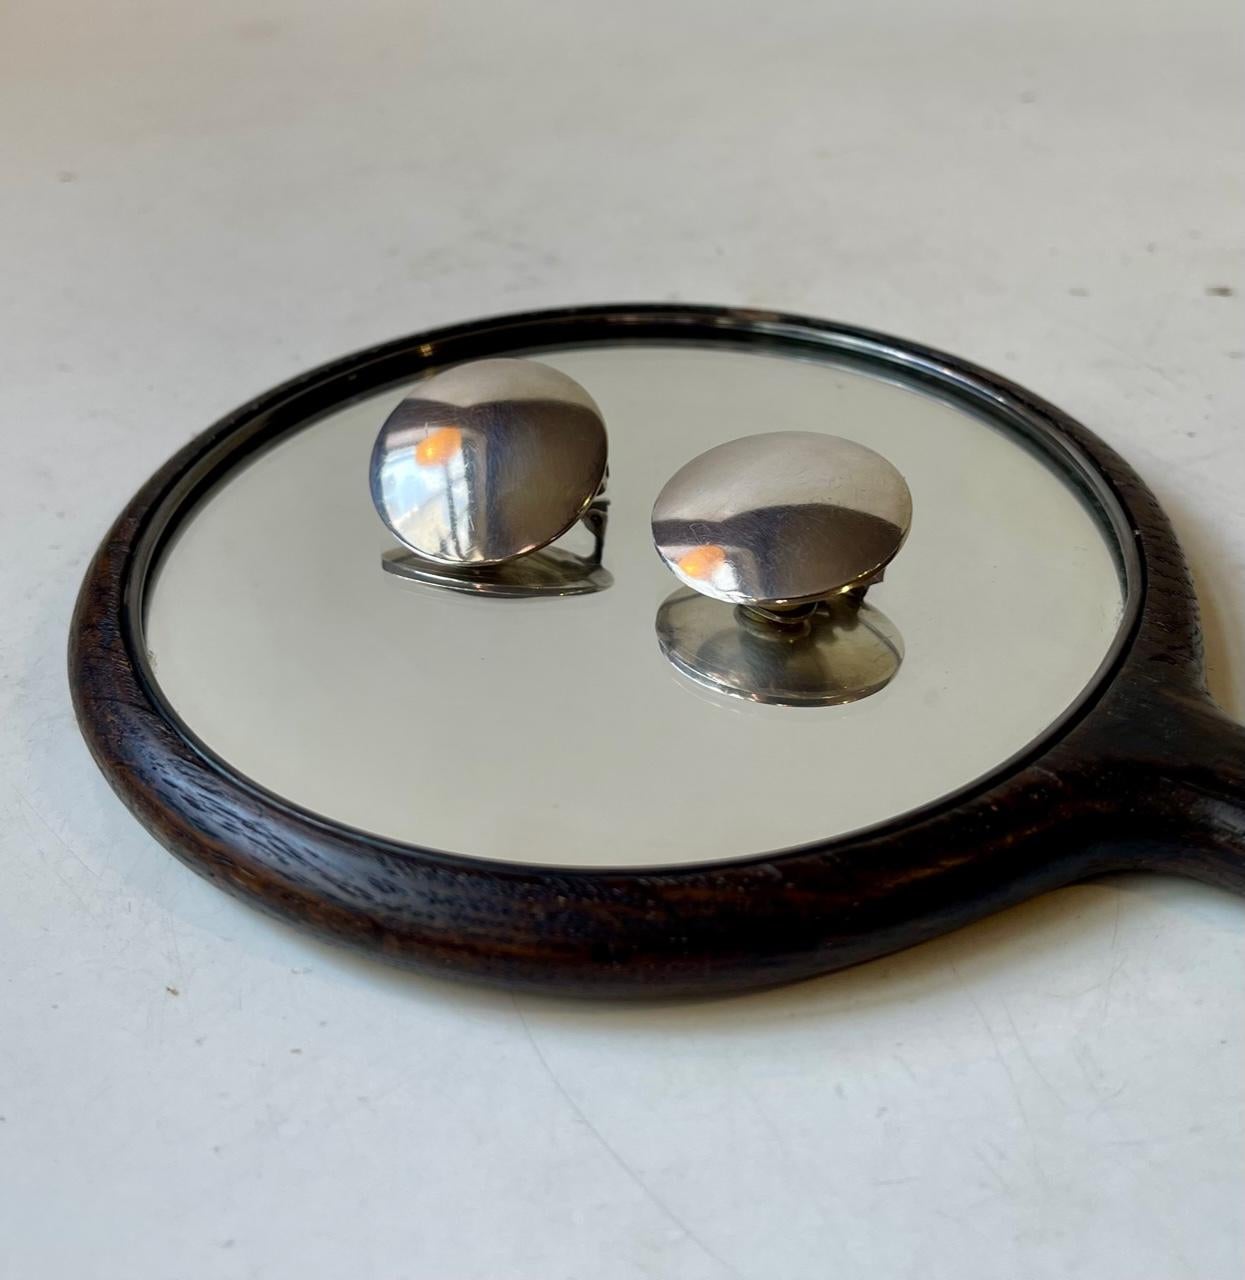 Sølvsmedien i Kolding, Denmark is closely related to Hans Hansen Silversmithy and accordingly Georg Jensen who took over the company during the 1980s. These XL (30mm) disc/ufo shaped ear clips were made circa 1980 and is hand made from 925 sterling